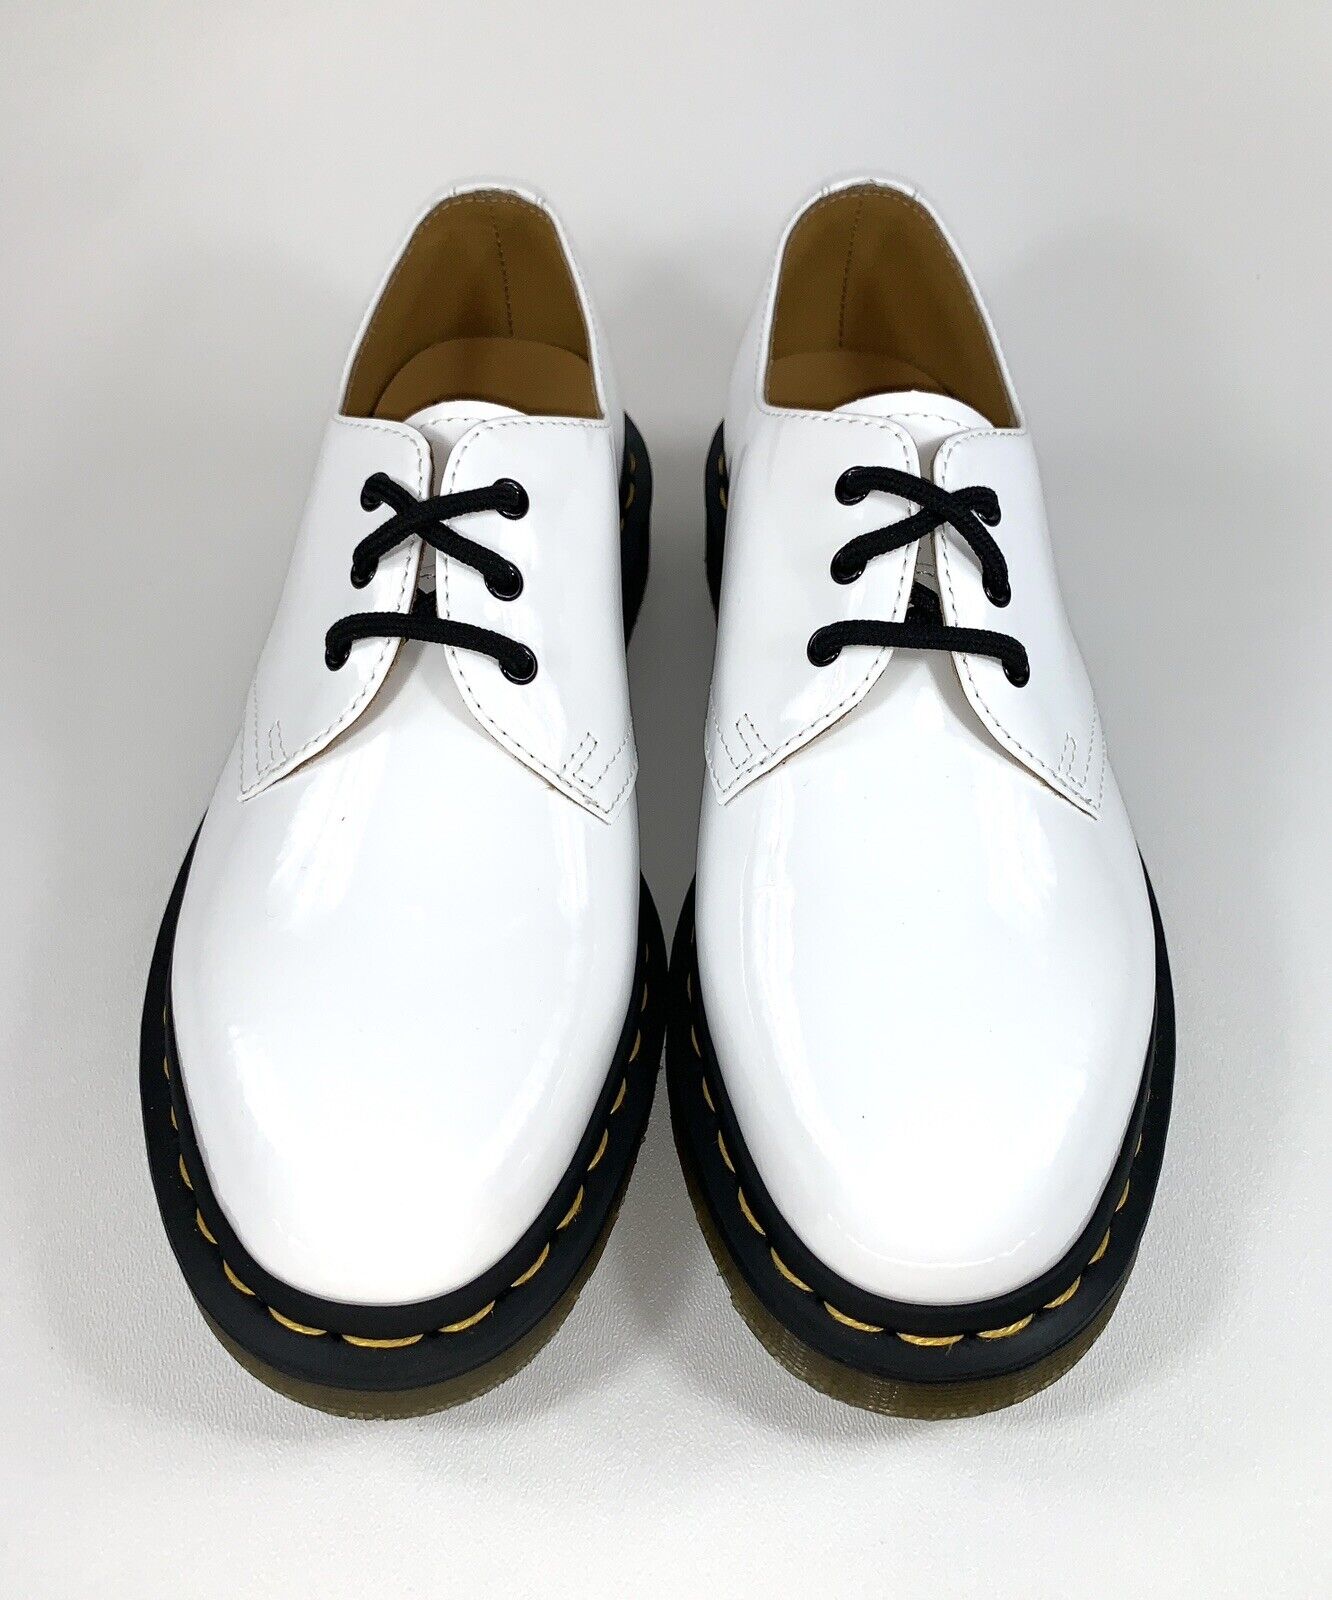 Dr. Martens 1461 Patent White Leather Lamper Oxfords Shoes 26754